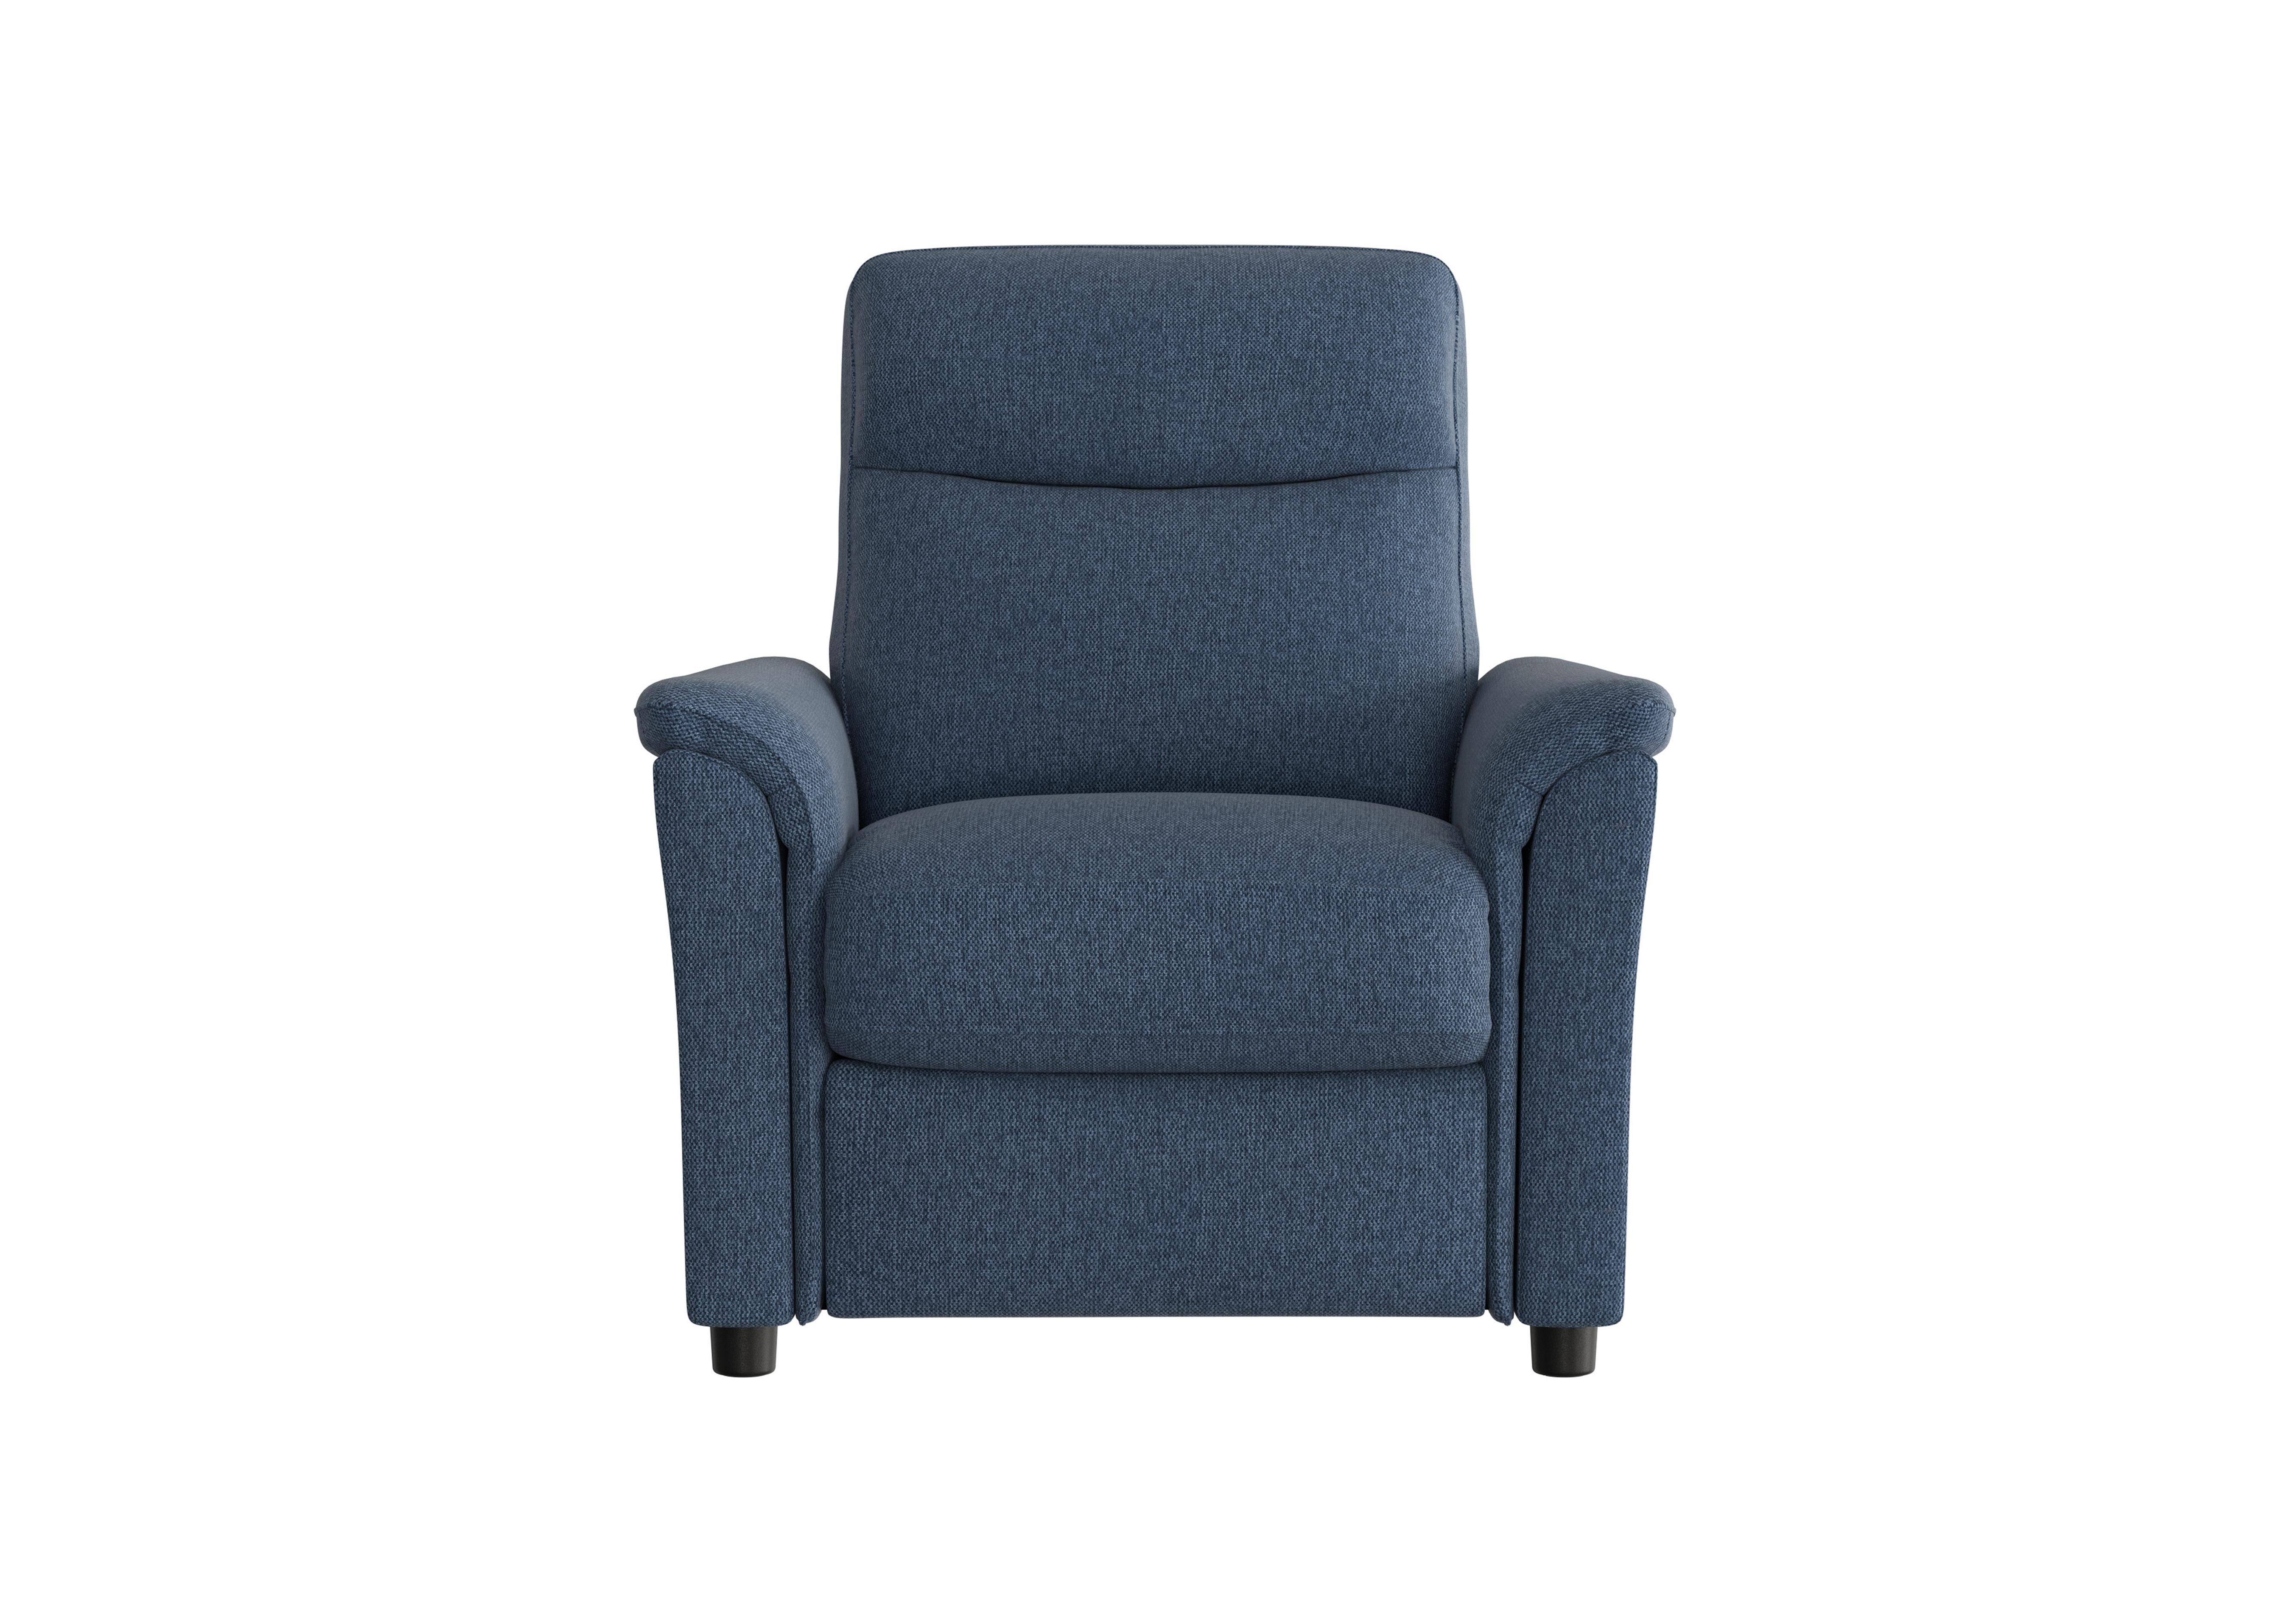 Piccolo Fabric Armchair in Fab-Blt-R38 Blue on Furniture Village